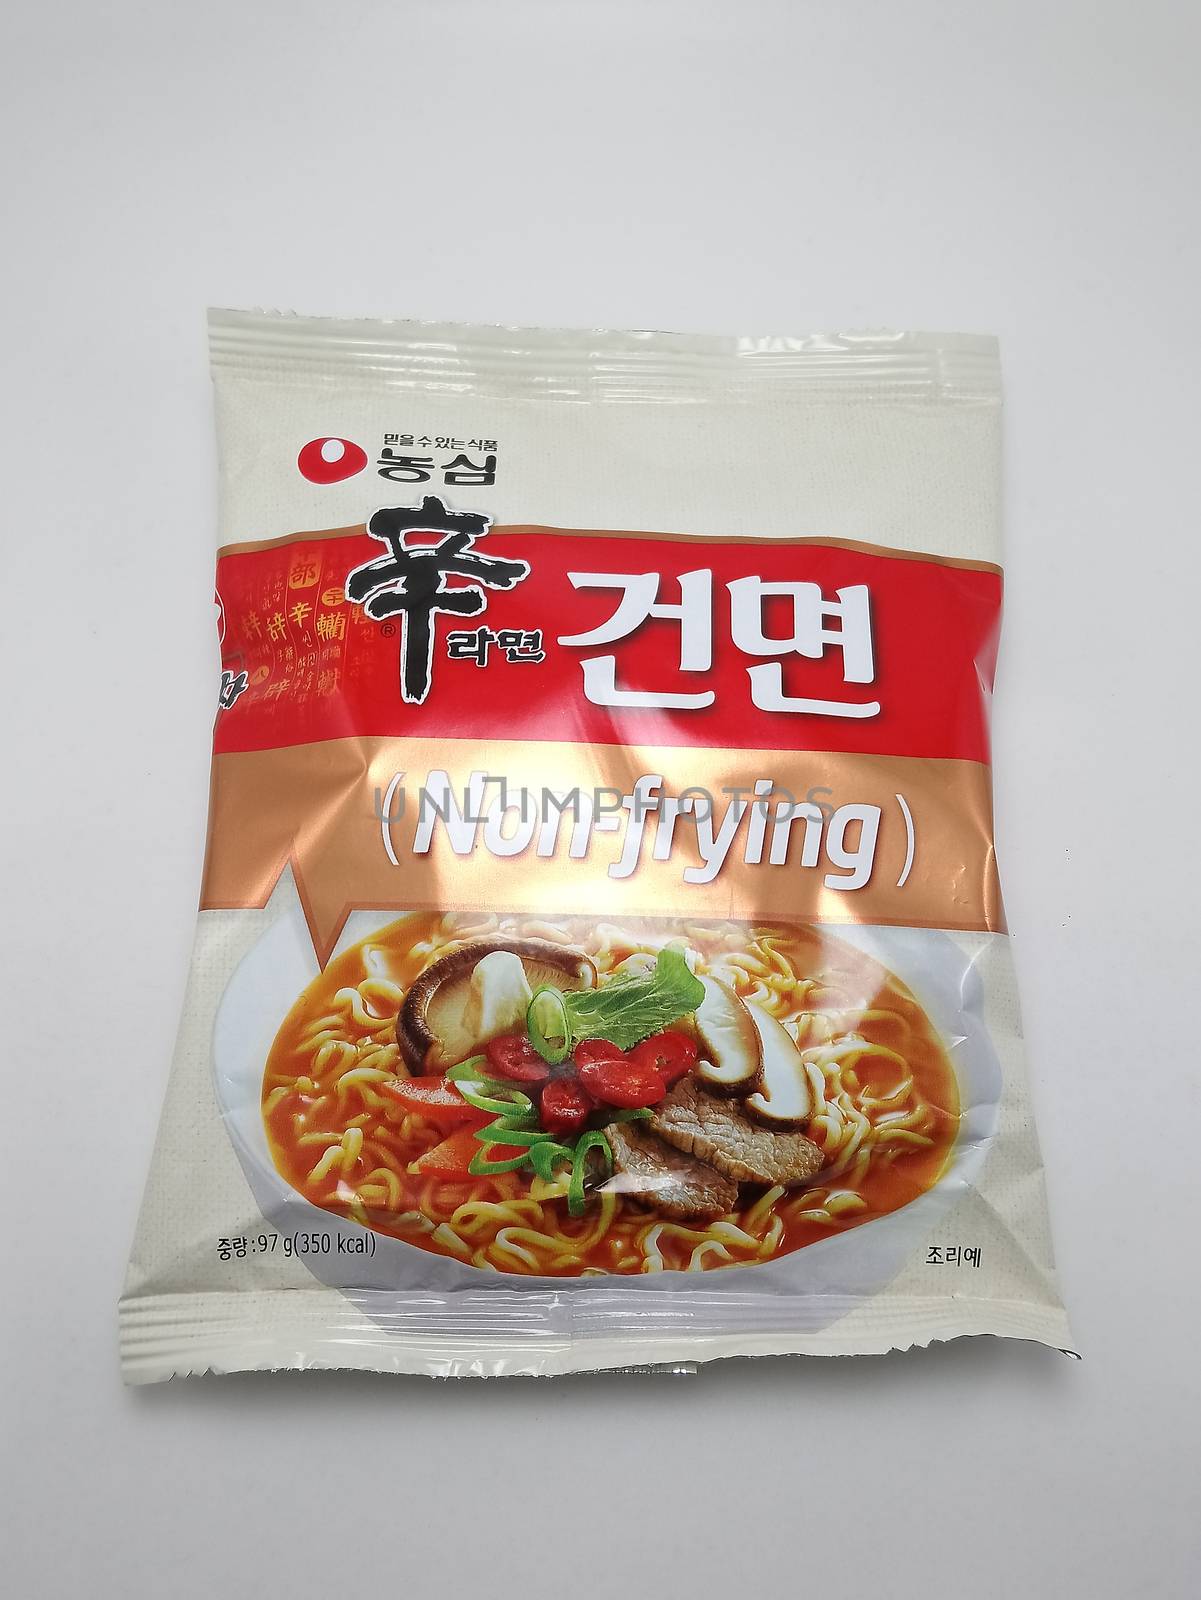 Nongshim non frying ramen noodles in Manila, Philippines by imwaltersy